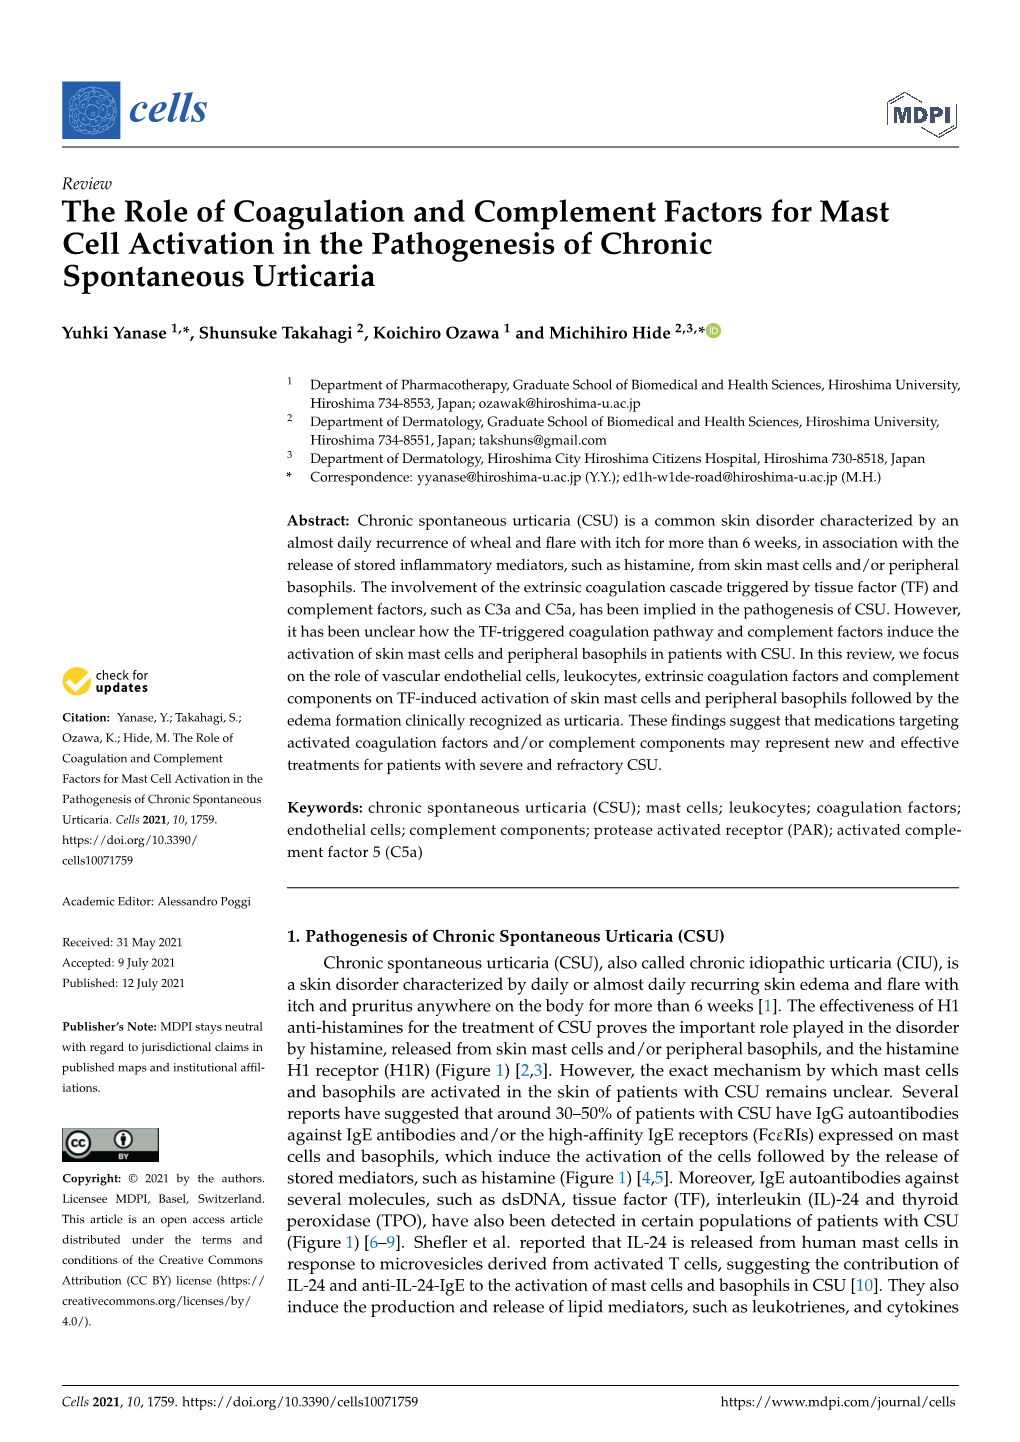 The Role of Coagulation and Complement Factors for Mast Cell Activation in the Pathogenesis of Chronic Spontaneous Urticaria